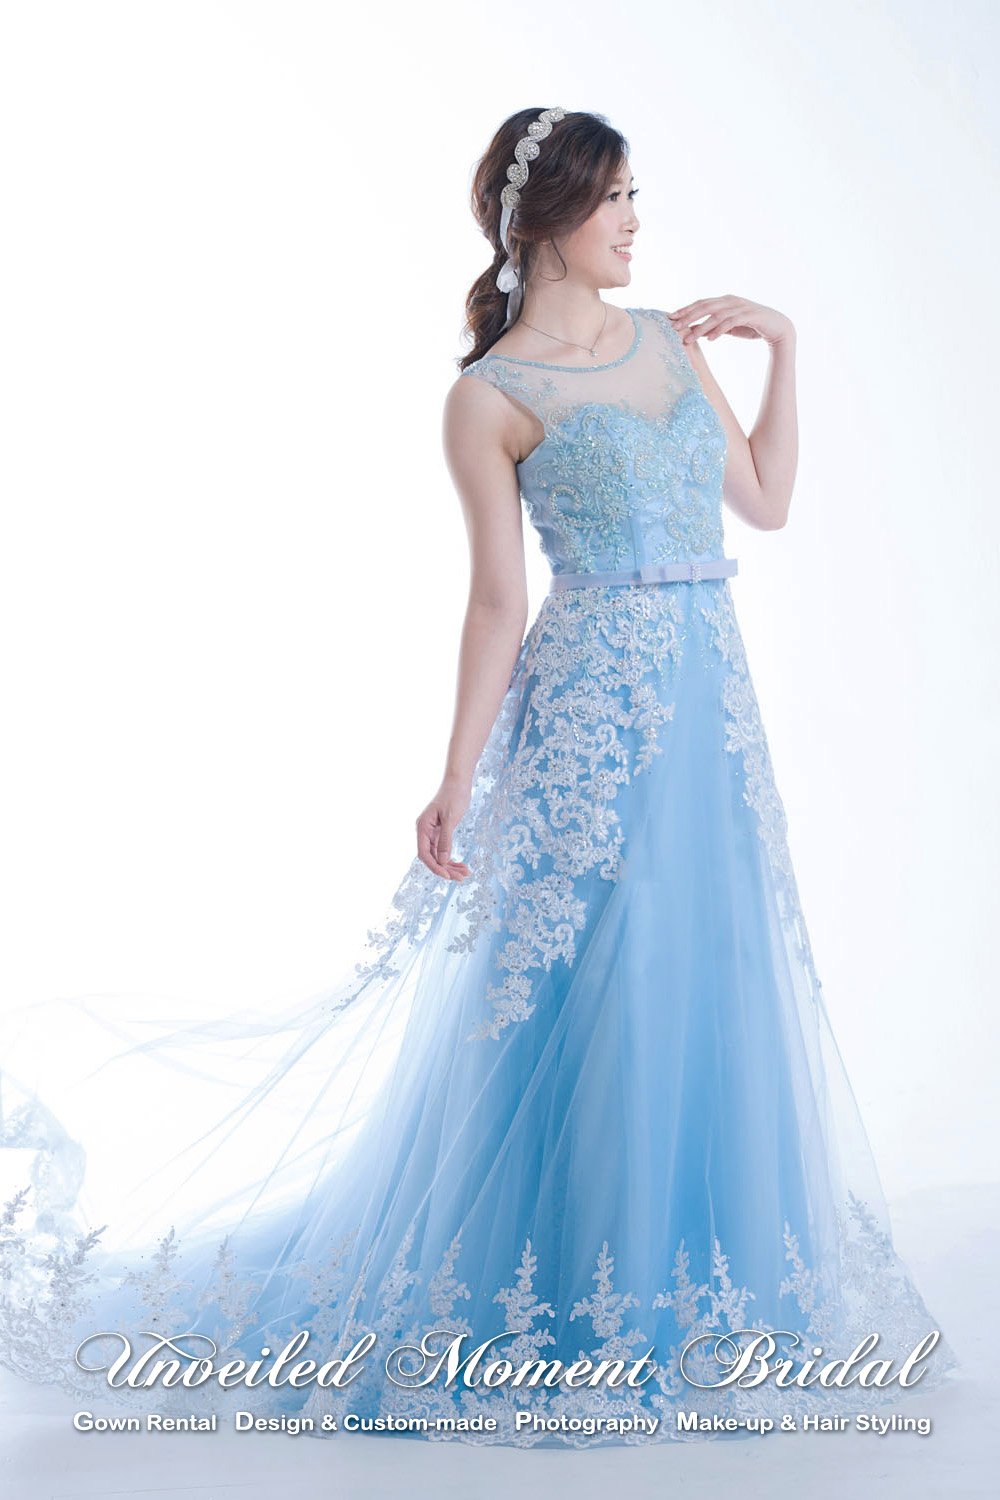 Bride wearing sleeveless, see-through round neckline, low-back, sky blue A-line evening dress with embellished lace appliques and sweep train 新娘穿上圓領, 蕾絲釘珠, 美背設計A-line粉藍色晚裝